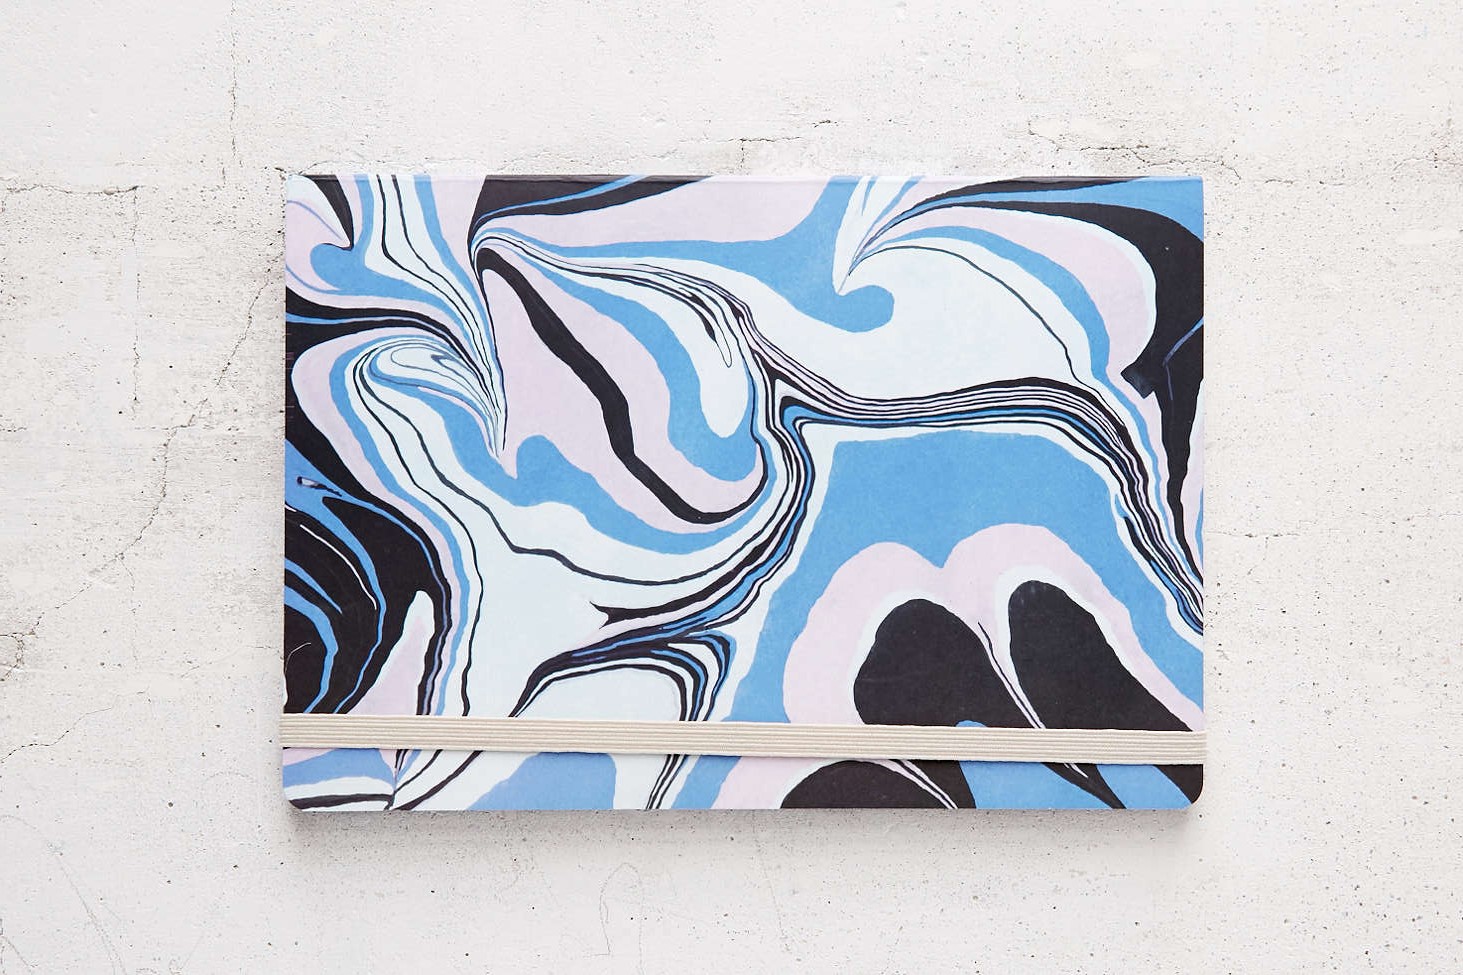 Urban Outfitters: Journals and notebooks for $2, free shipping